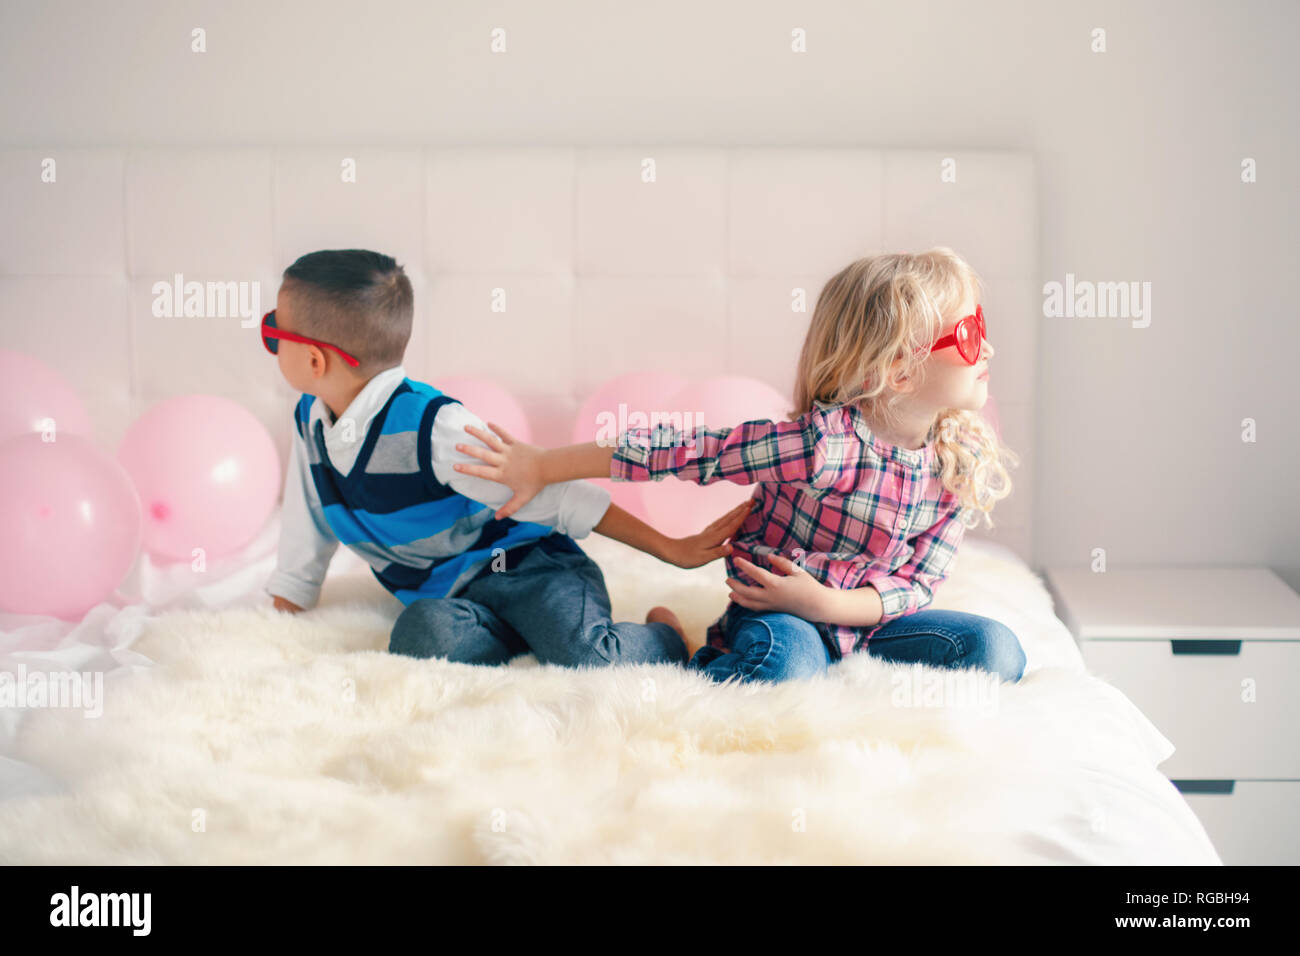 Boy Quarrel Girl High Resolution Stock Photography And Images Alamy